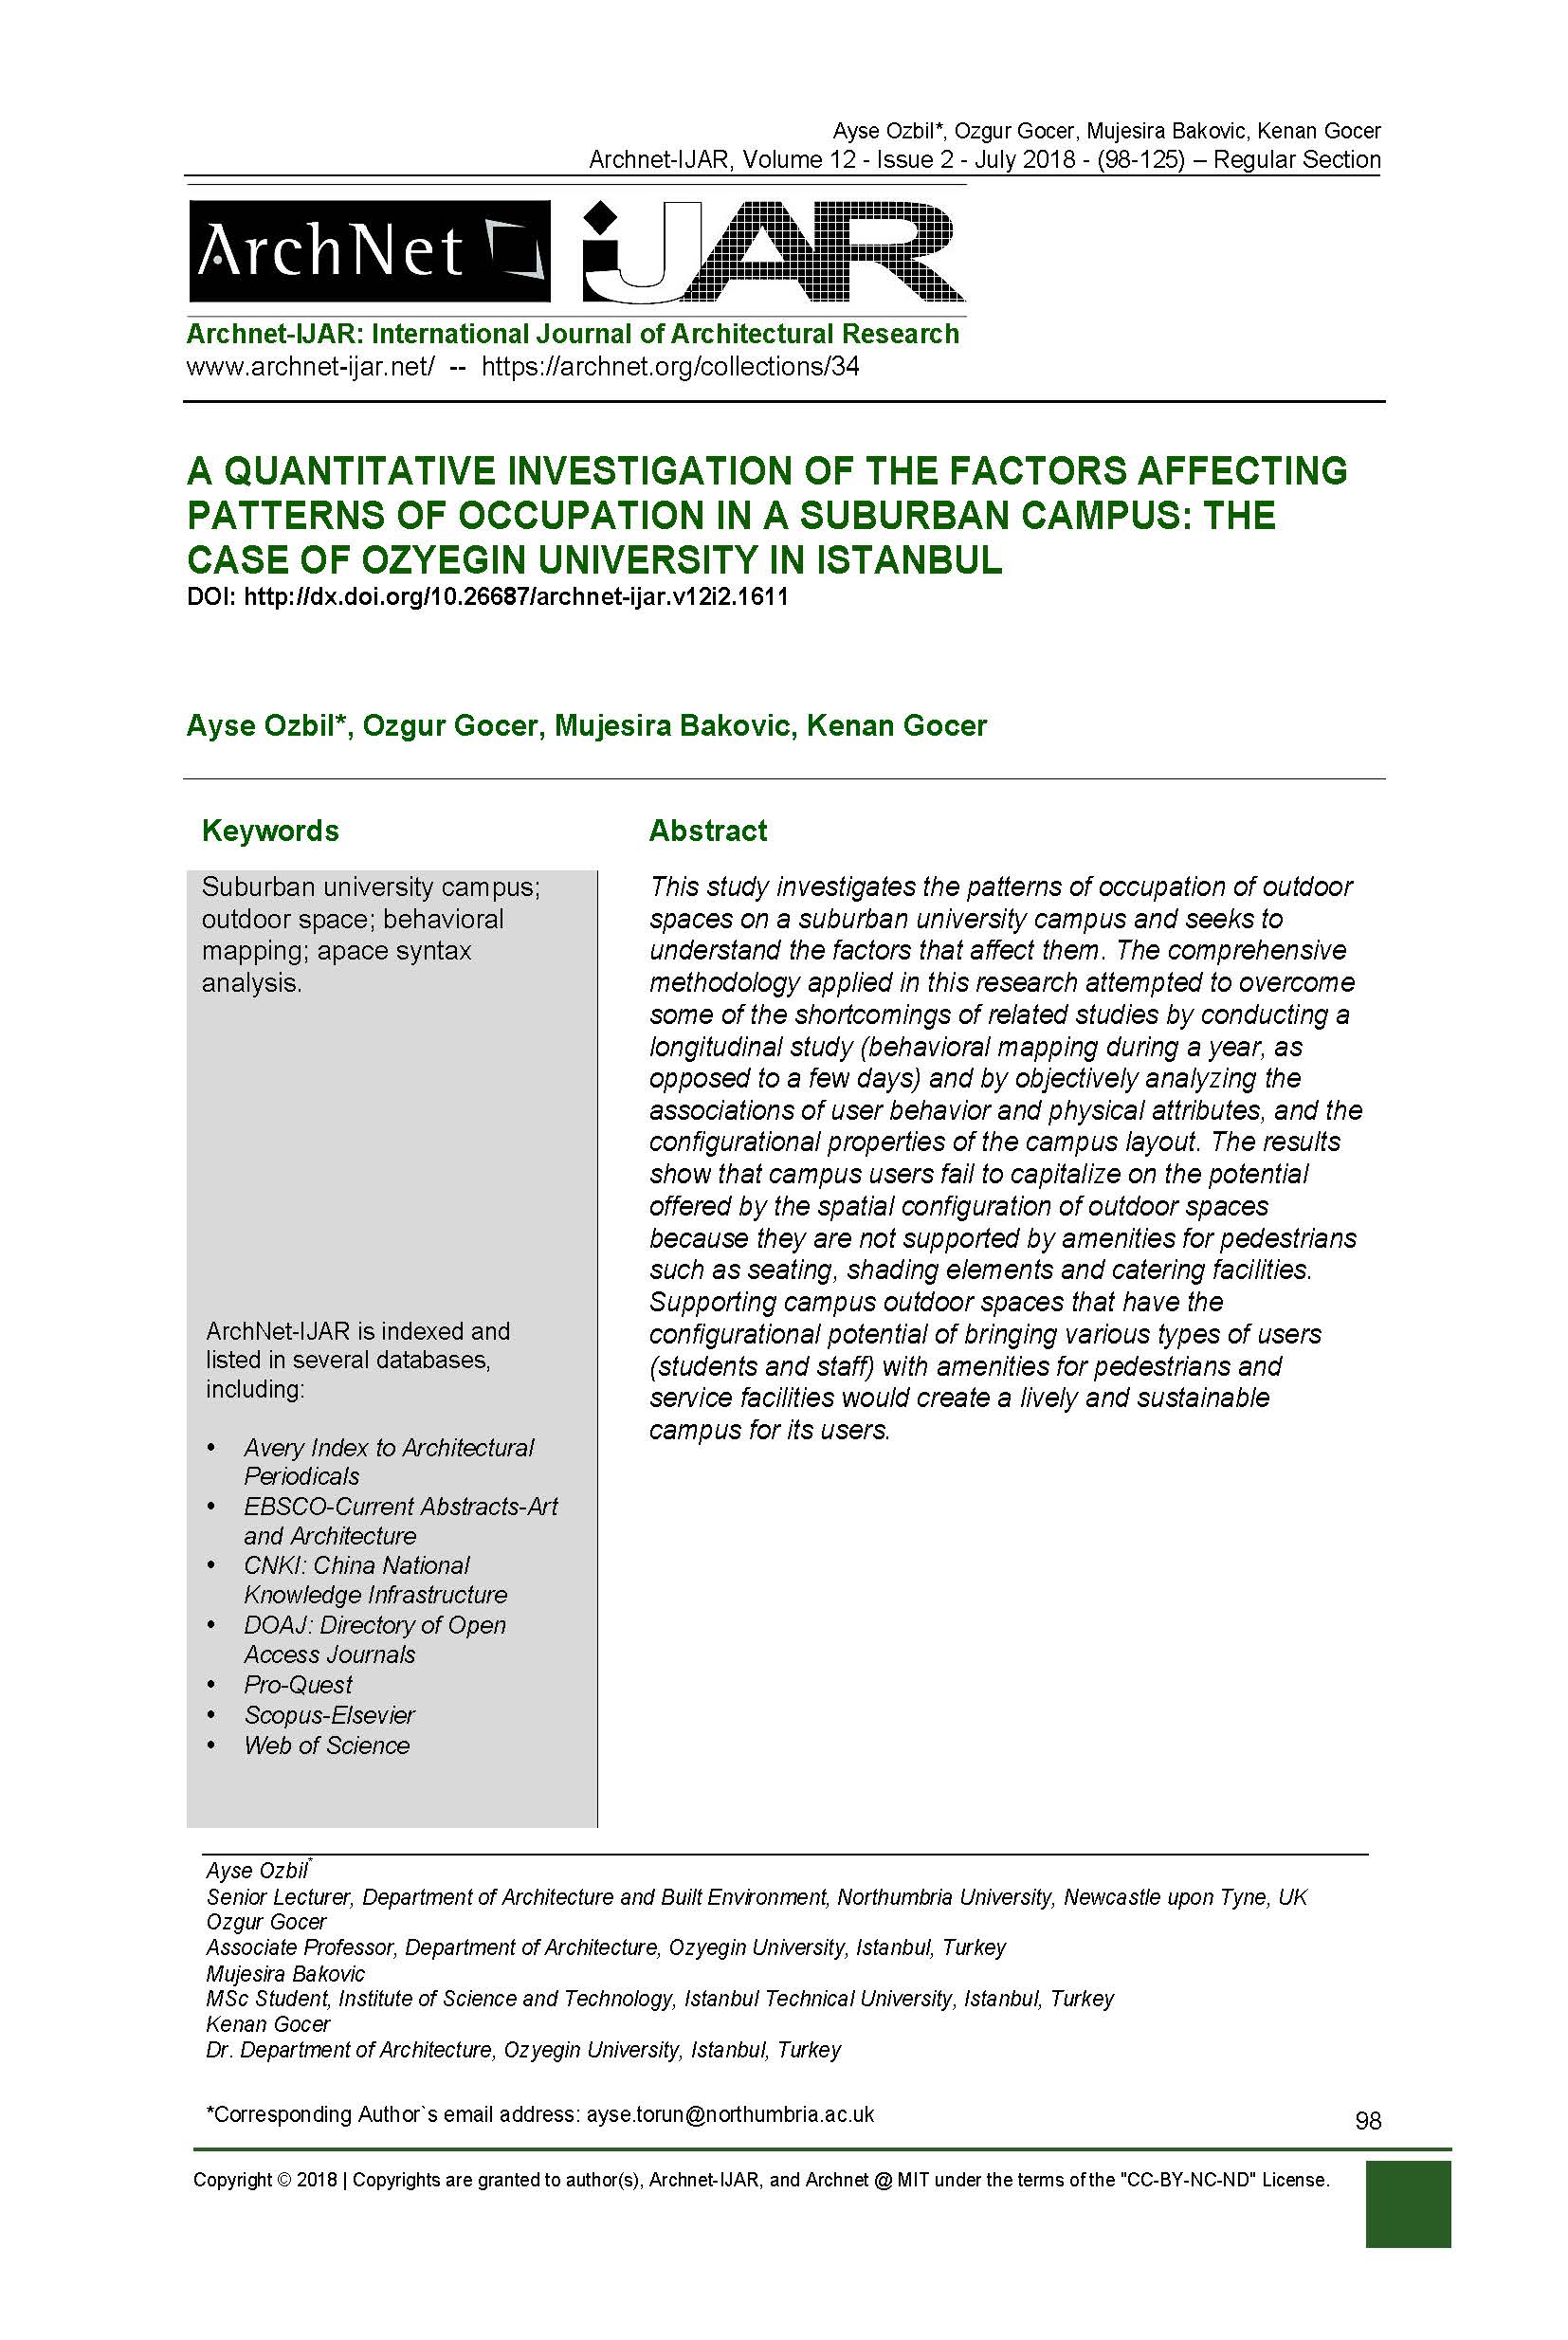 A Quantitative Investigation of the Factors Affecting Patterns of Occupation in a Suburban Campus: The Case of Ozyegin University in Istanbul